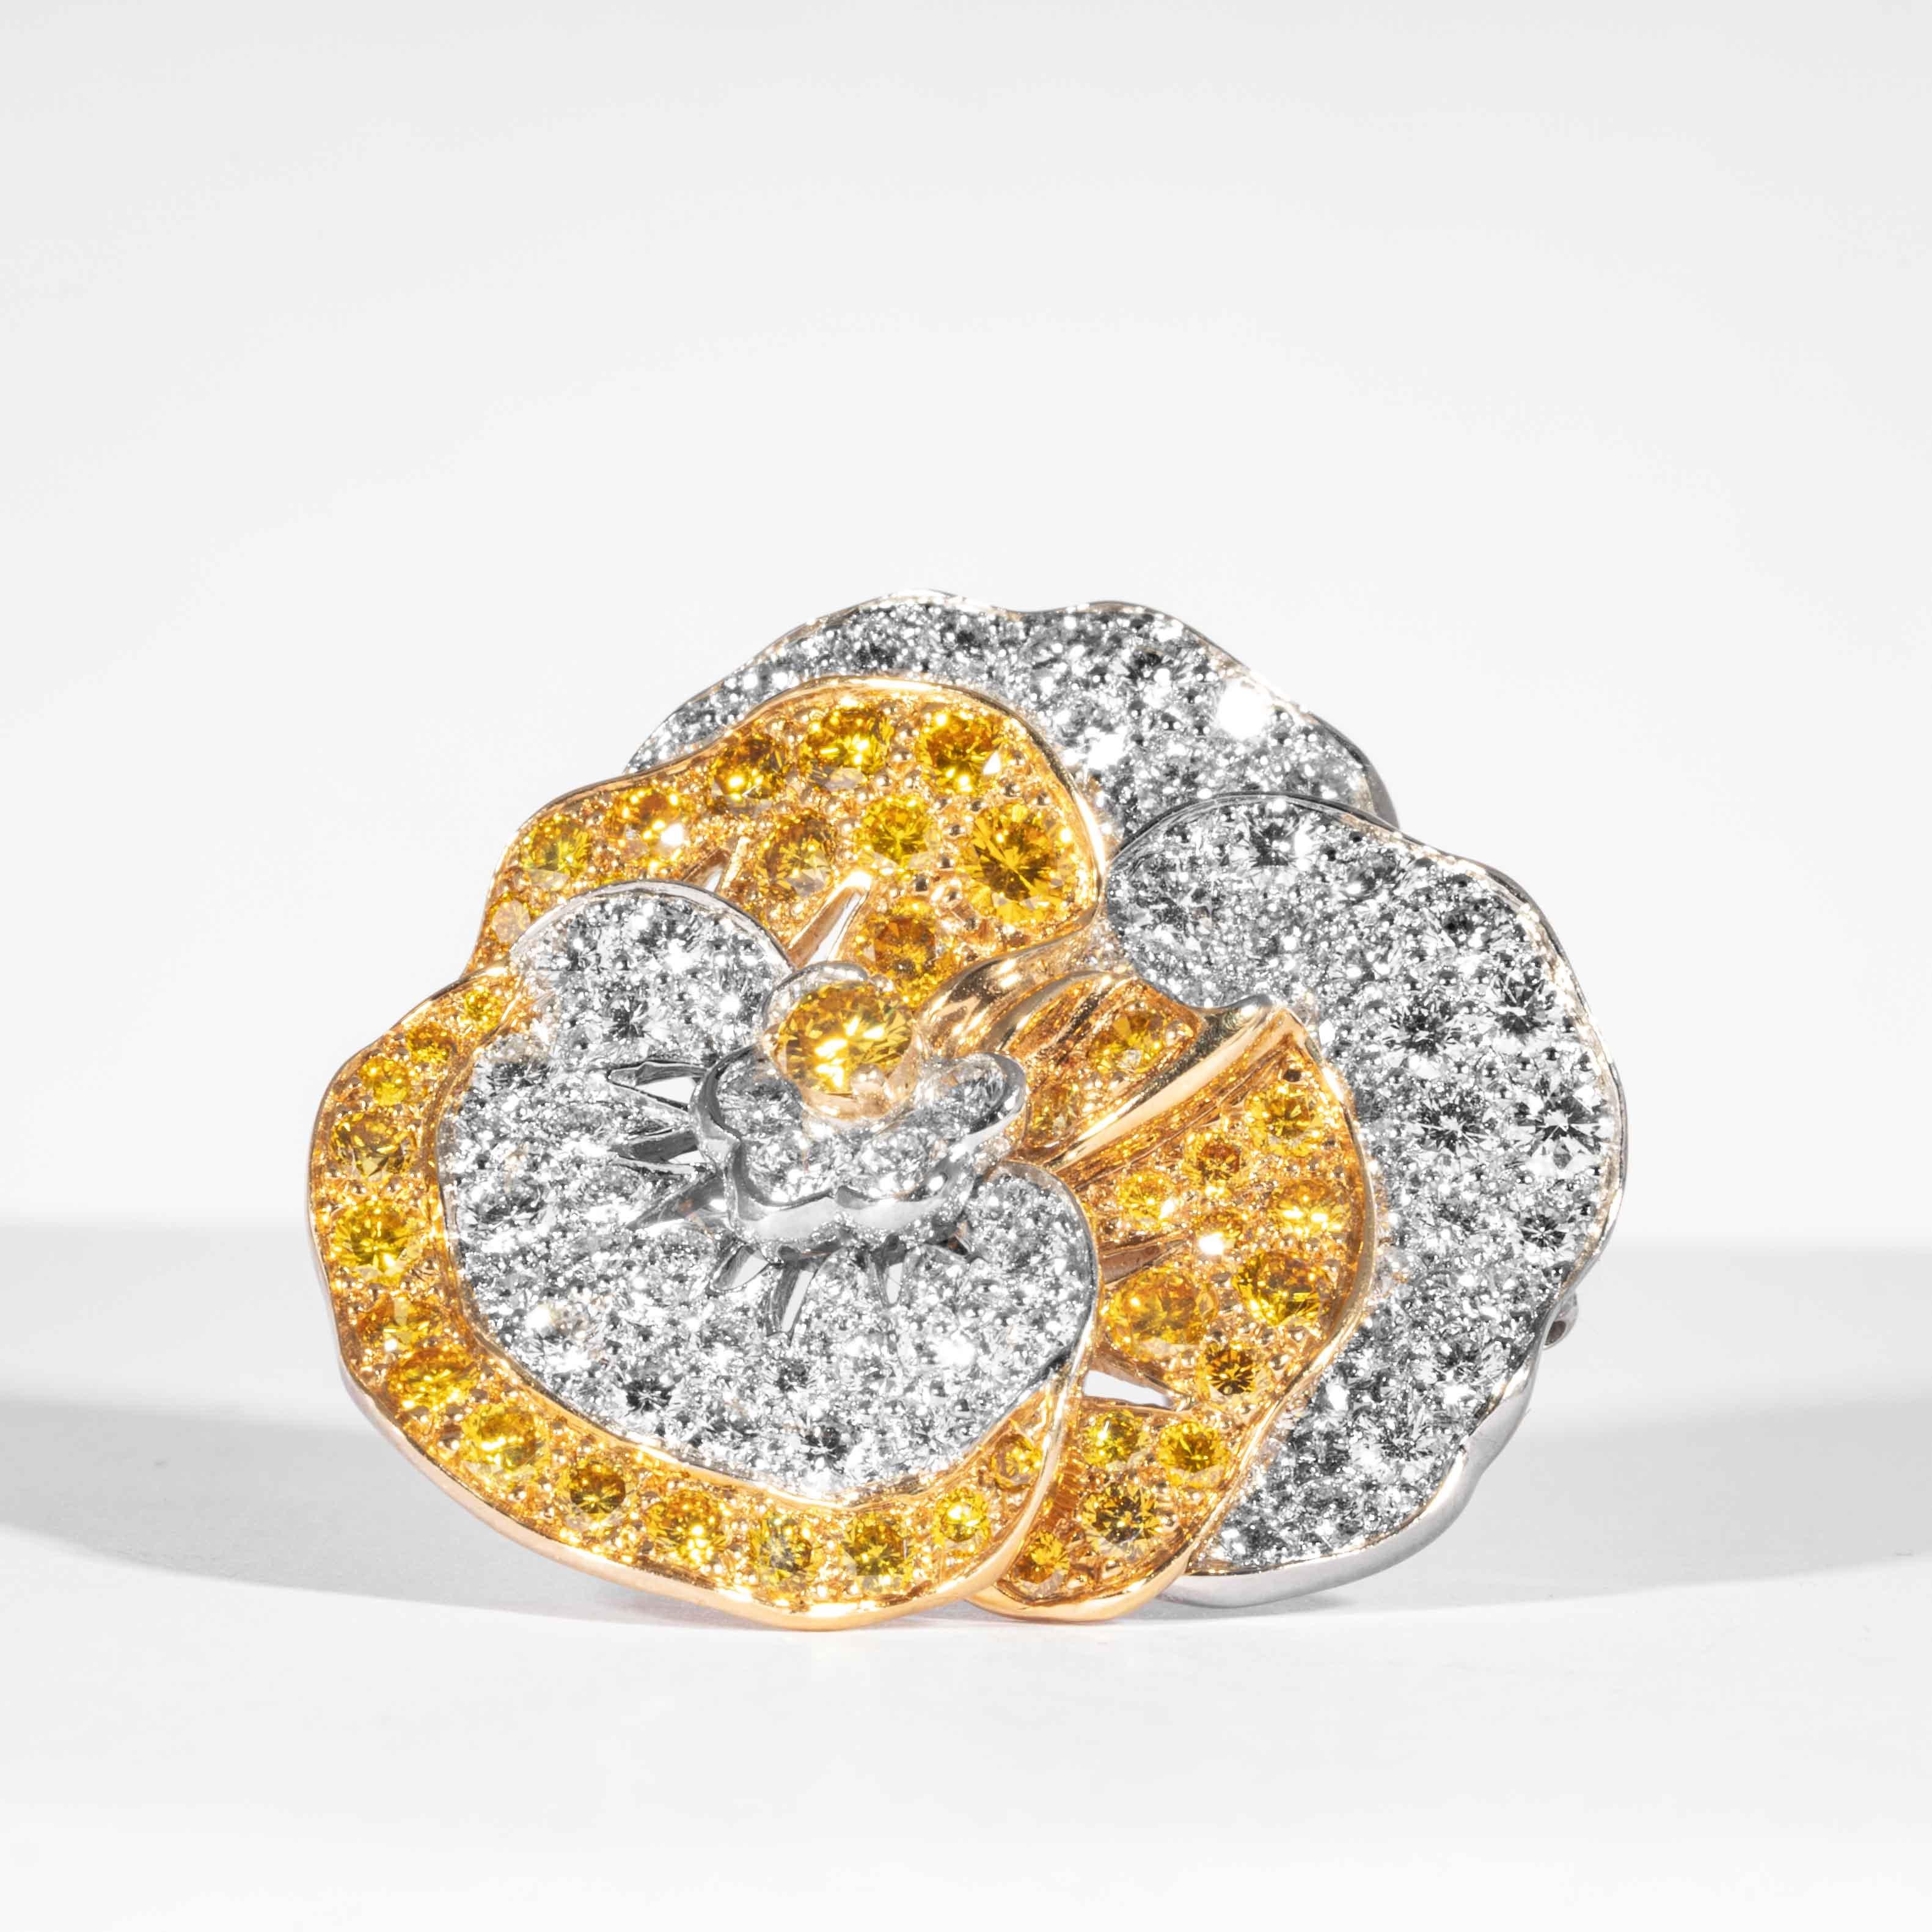 Fancy yellow canary diamonds and white diamonds are set in 18kt yellow gold and platinum in this whimsically classic floral pansy pin. Consisting of approximately 117 round brilliant cut natural canary and colorless white diamonds at a total carat